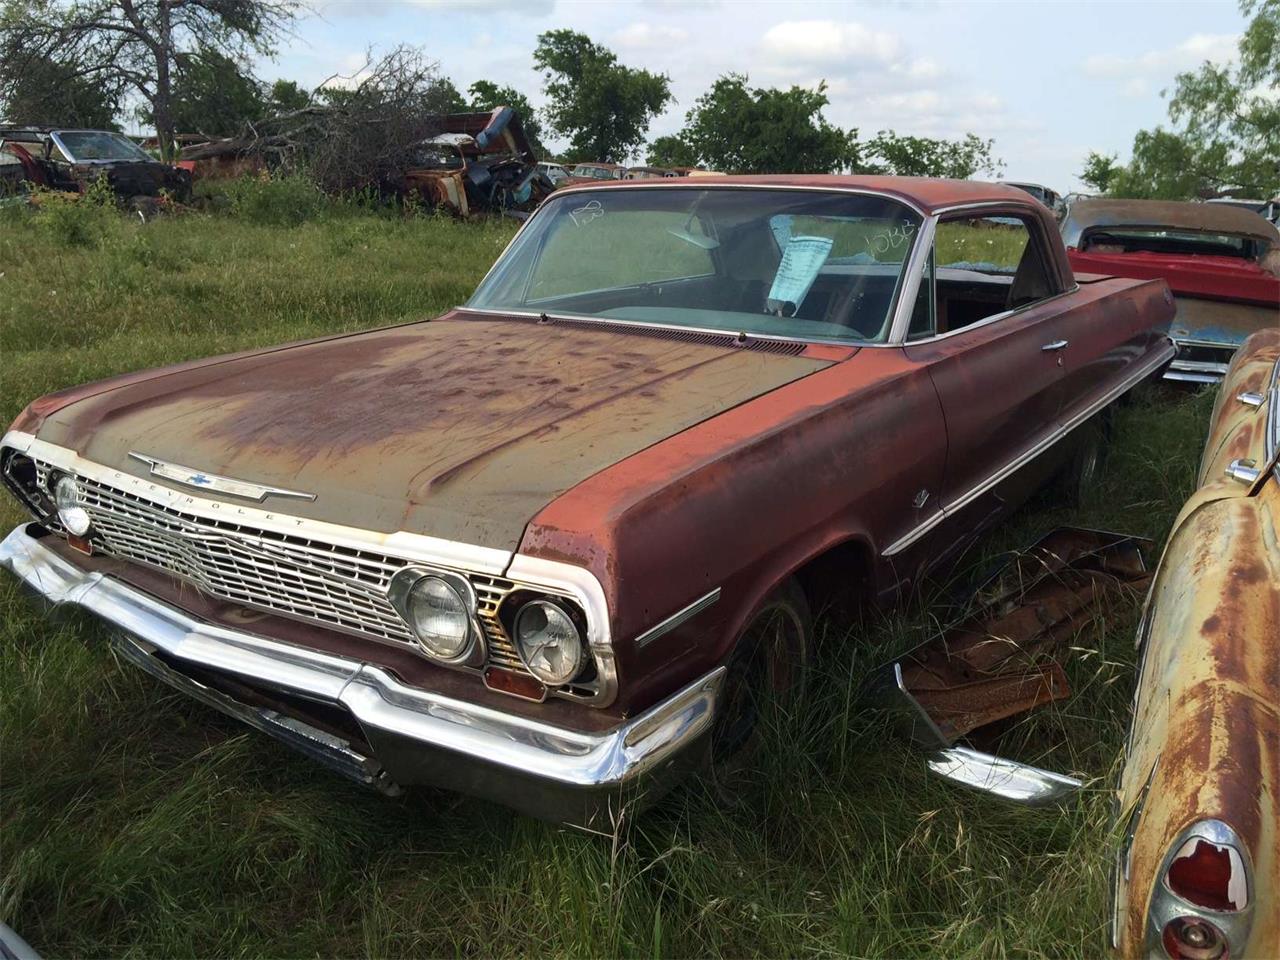 1963 Chevrolet Impala Ss For Sale In Midlothian Tx Classiccarsbay Com